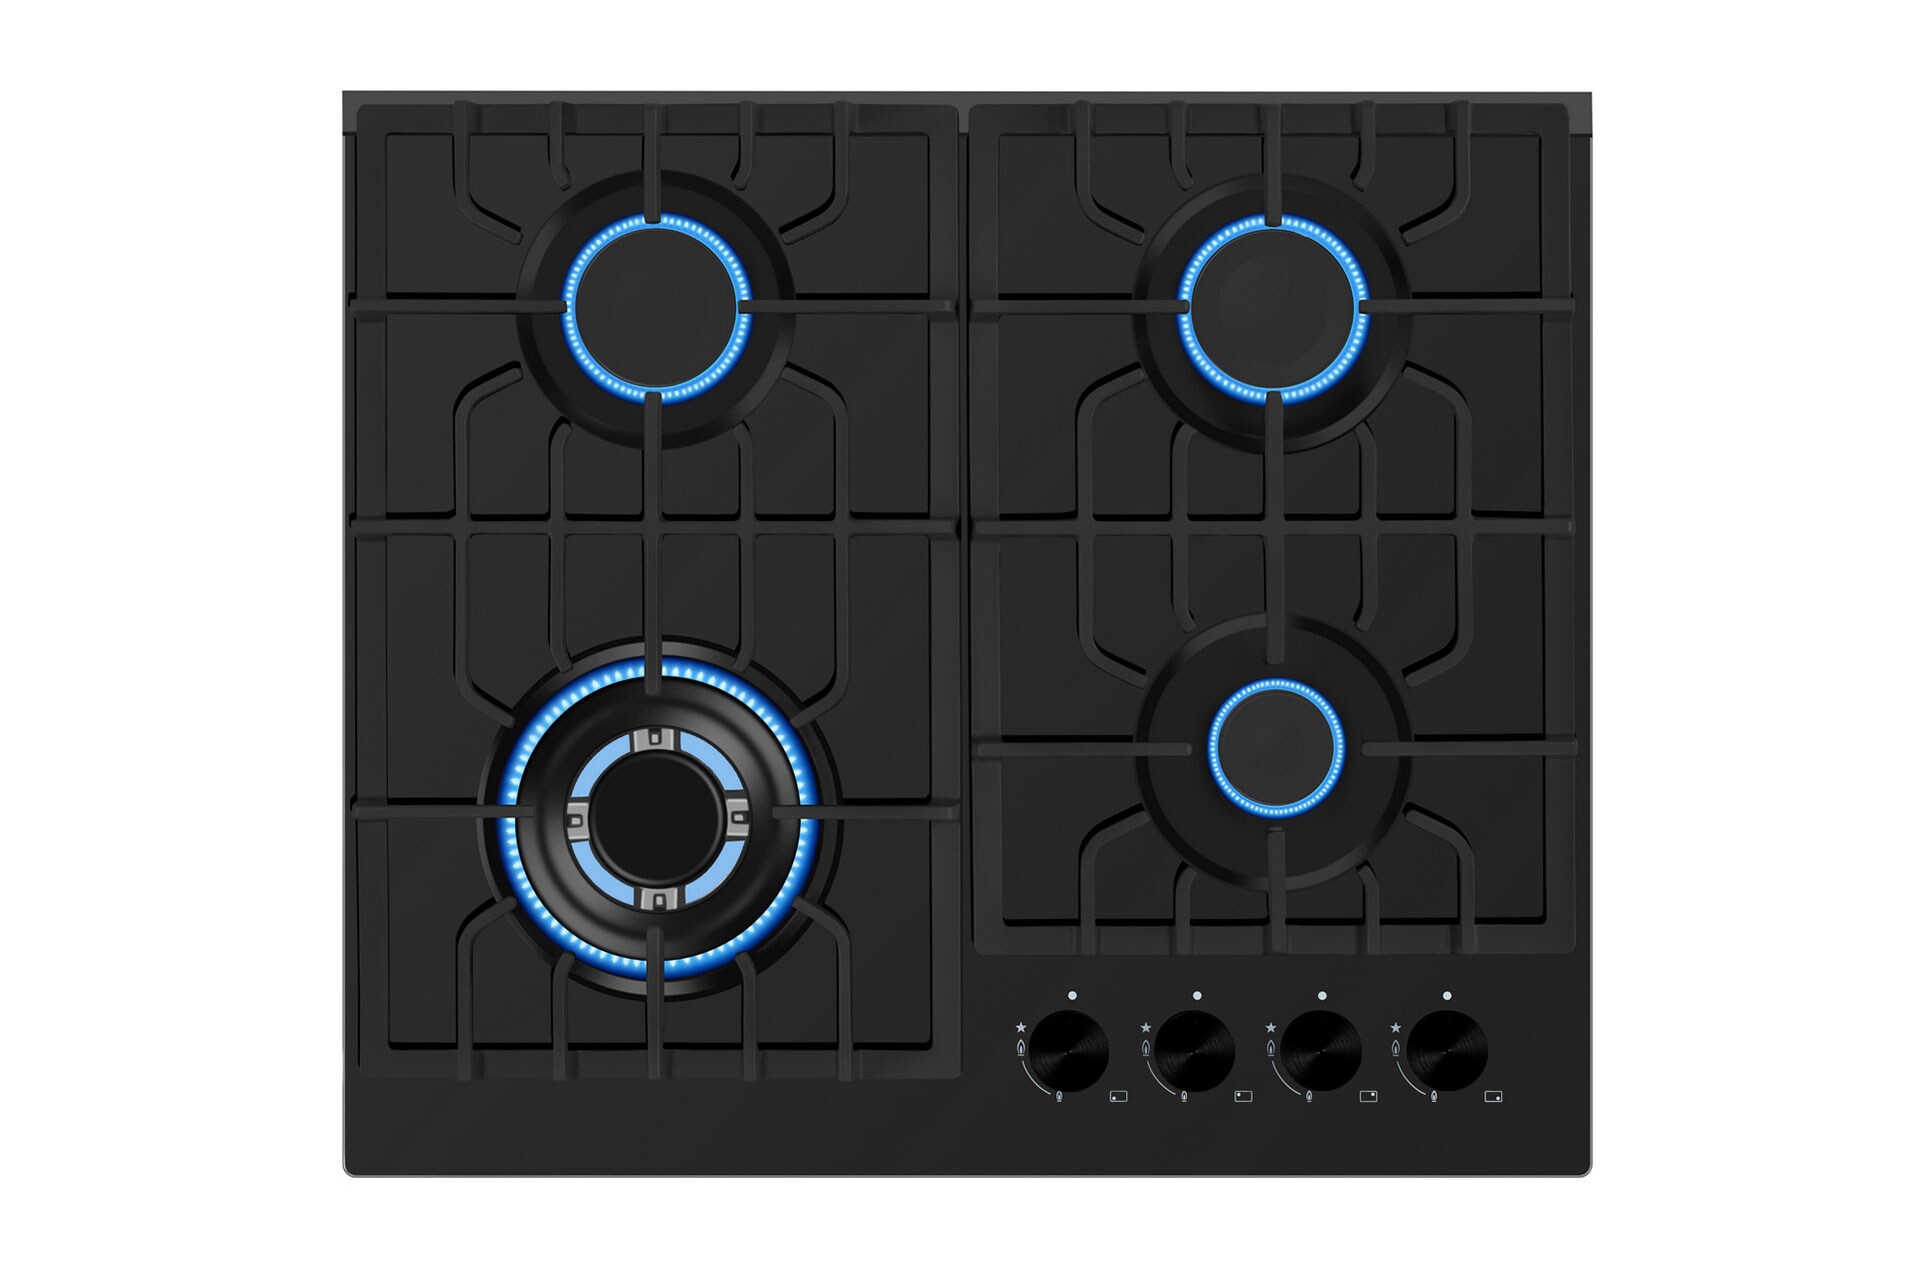 Blk Cook Top 30" Tempered Glass Built-in 5 Burner Stove LPG/NG Gas Hob Cooktops 